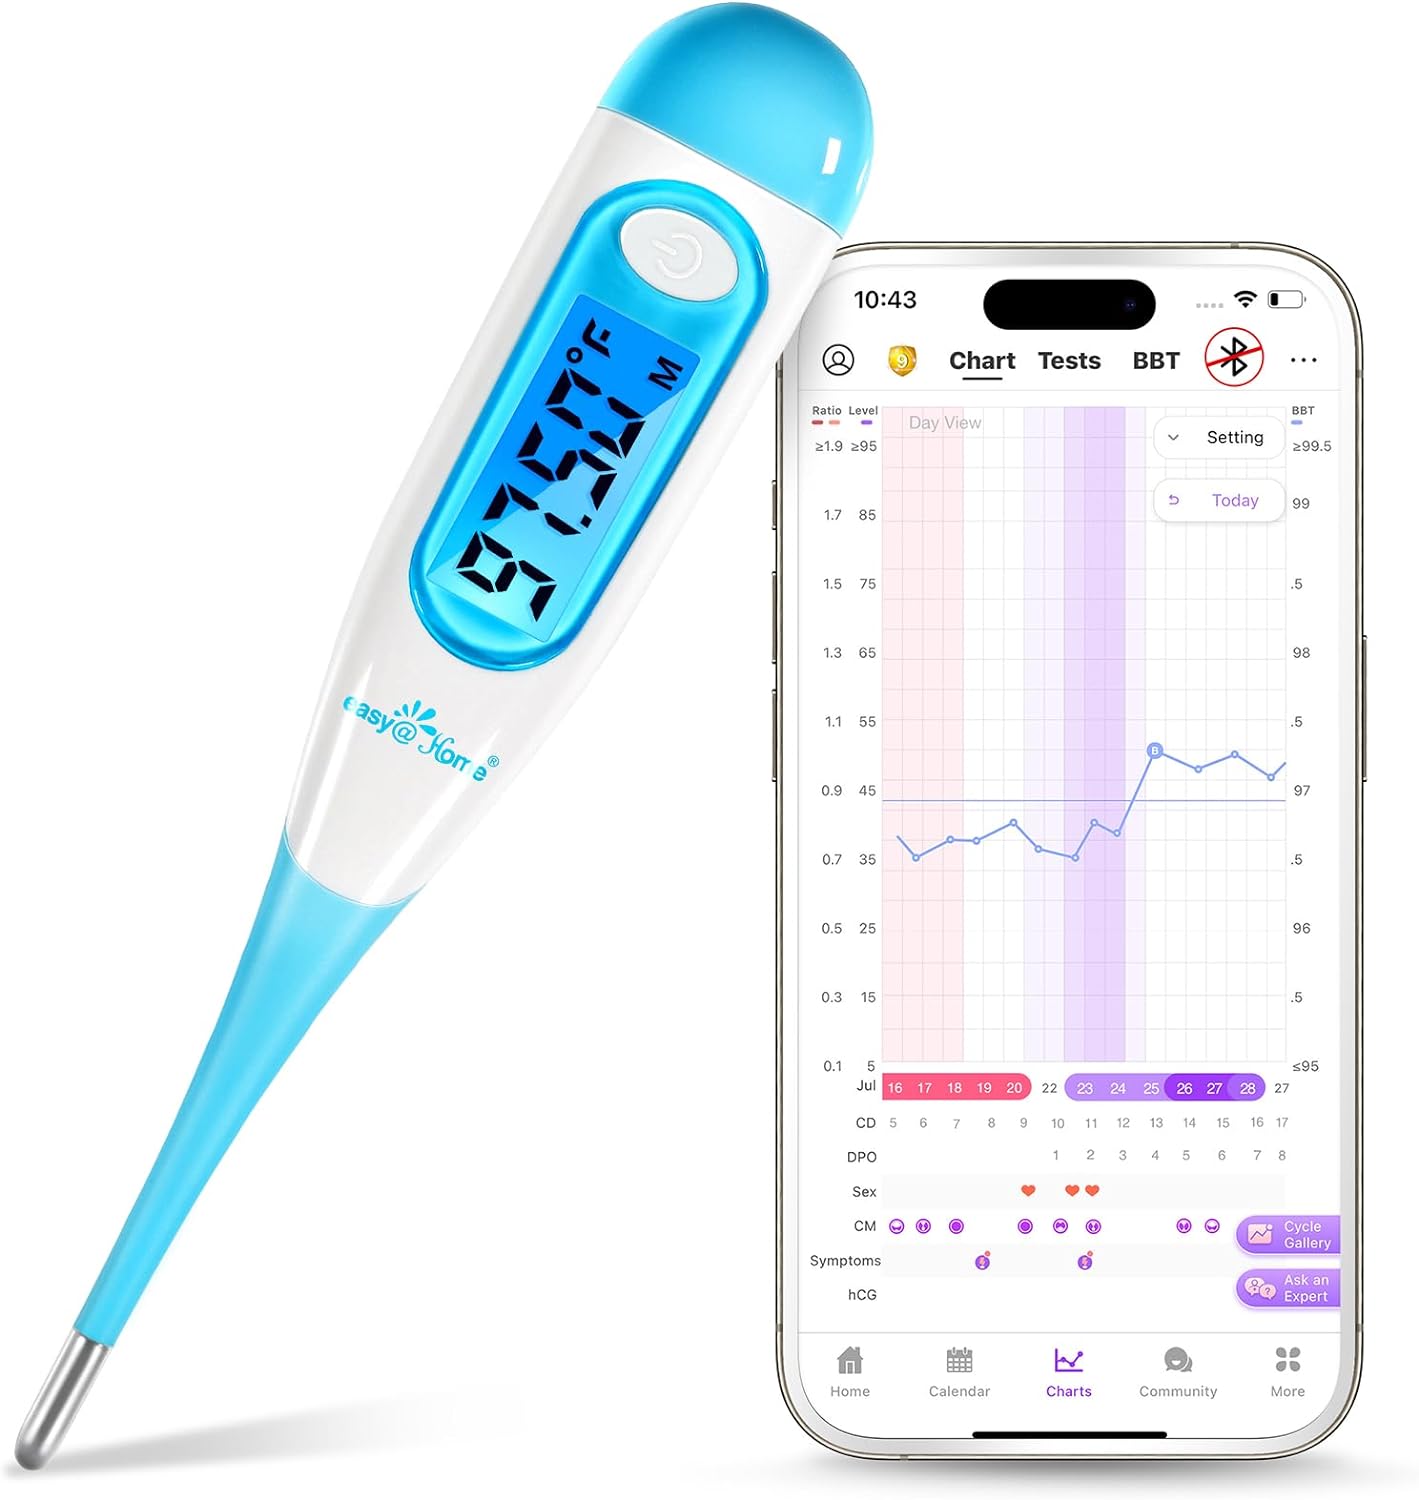 Easy@Home Digital Basal Thermometer with Blue Backlight LCD Display, 1/100th Degree High Precision and Memory Recall, NOT Bluetooth Enabled, Upgraded EBT-100B(Blue)